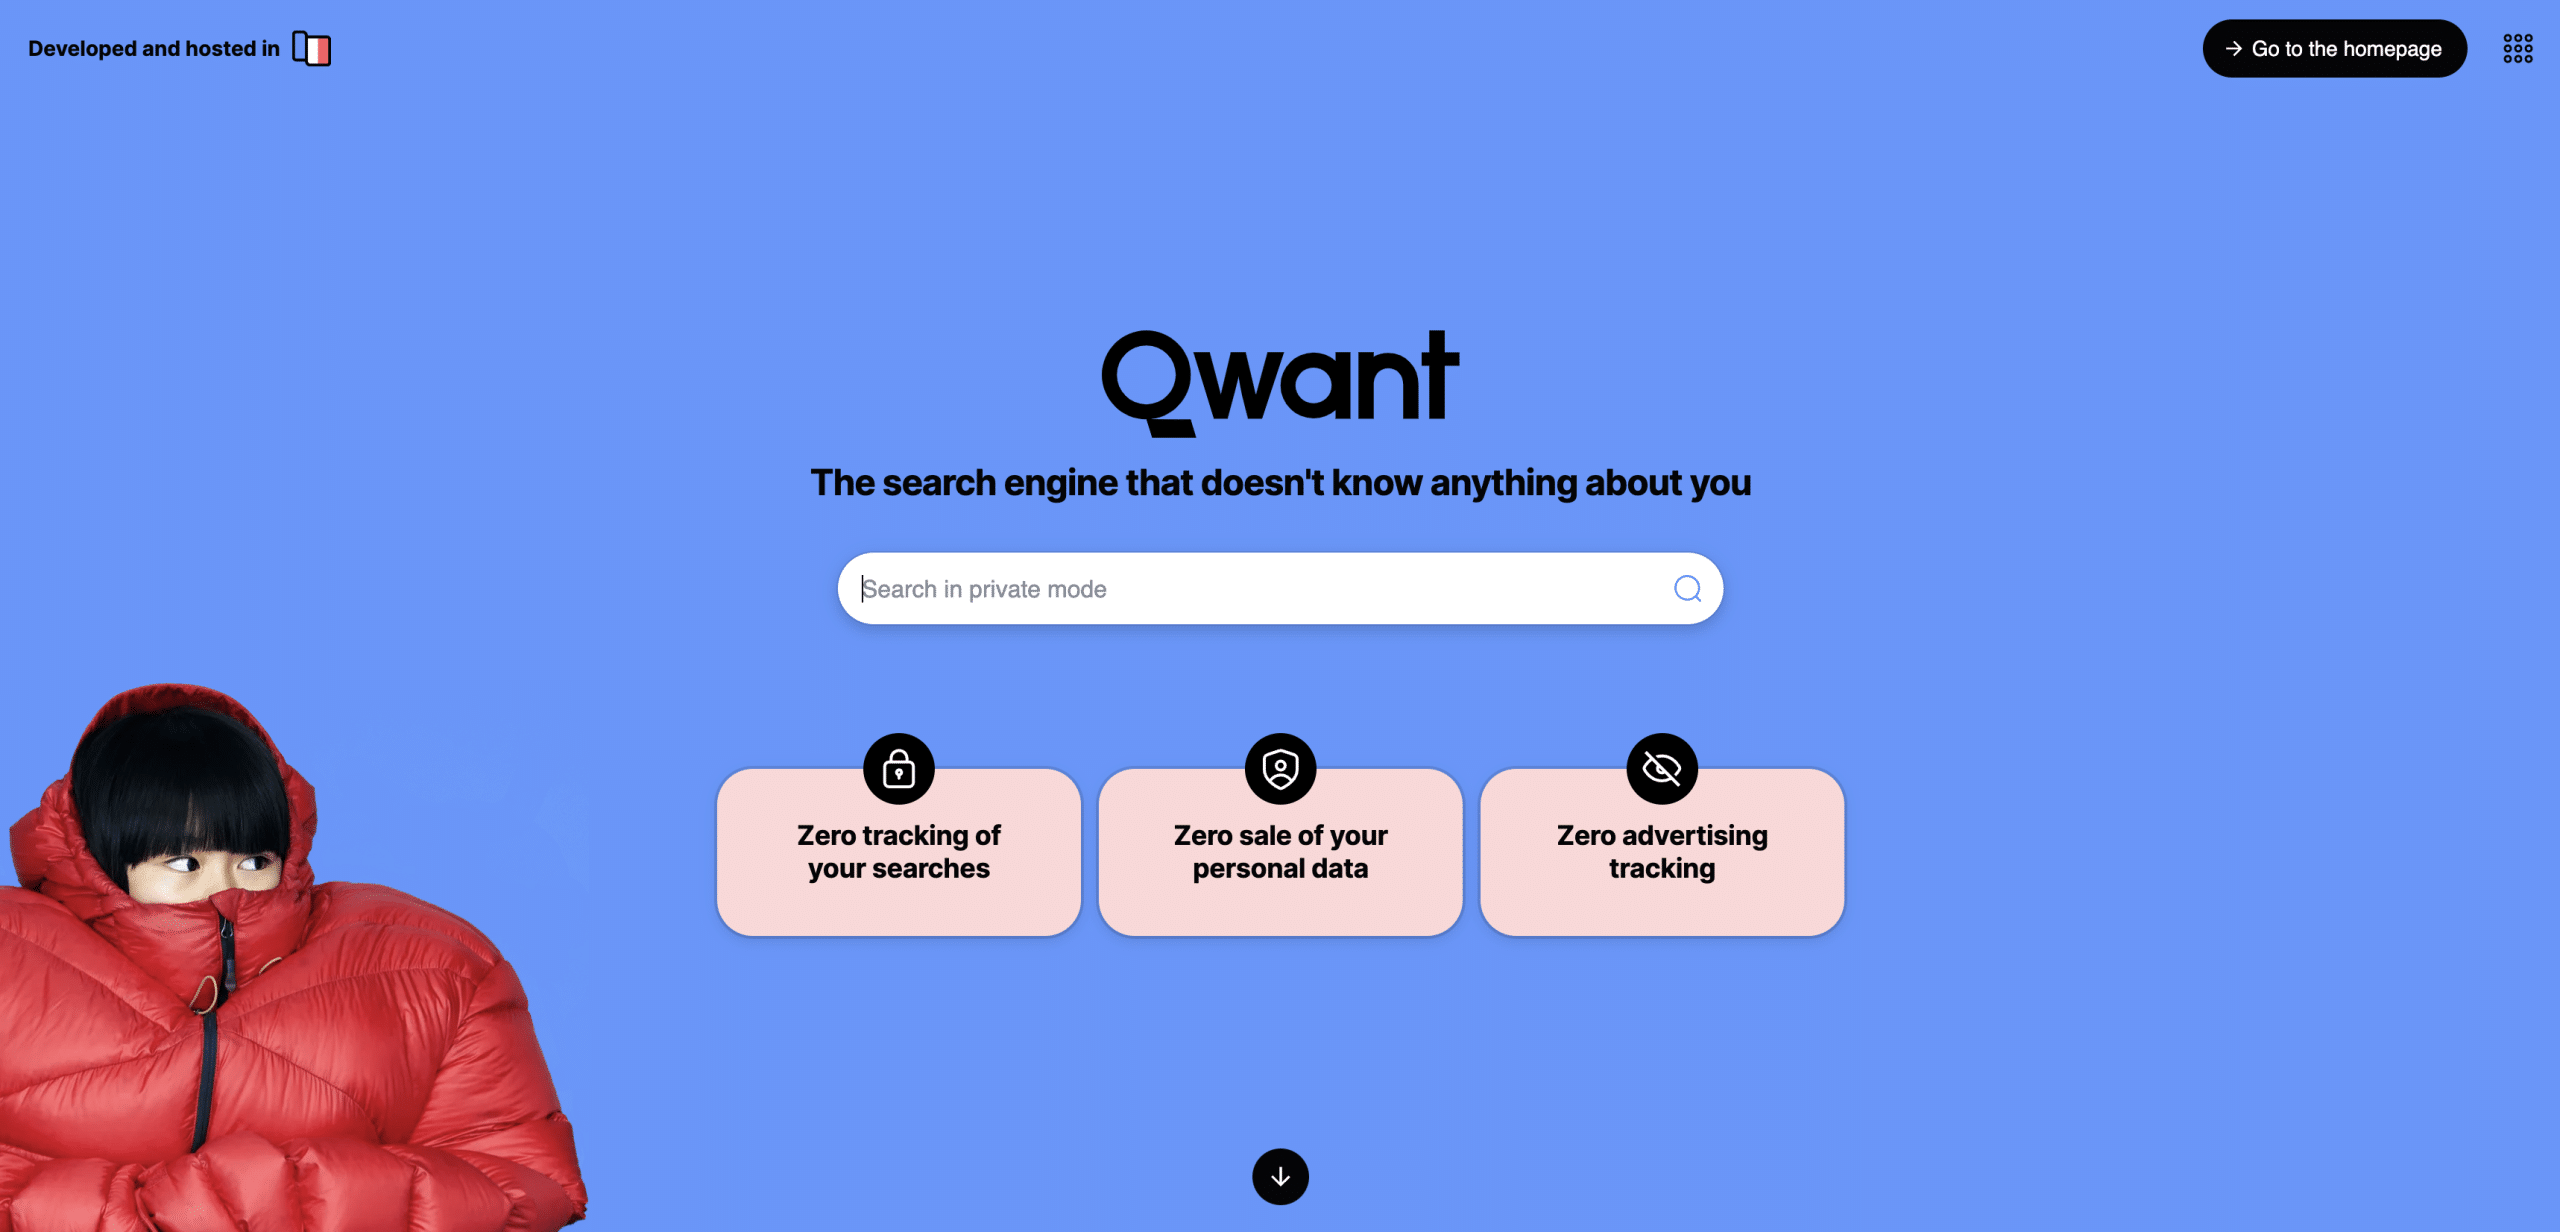 screenshot shows landing page for Qwant